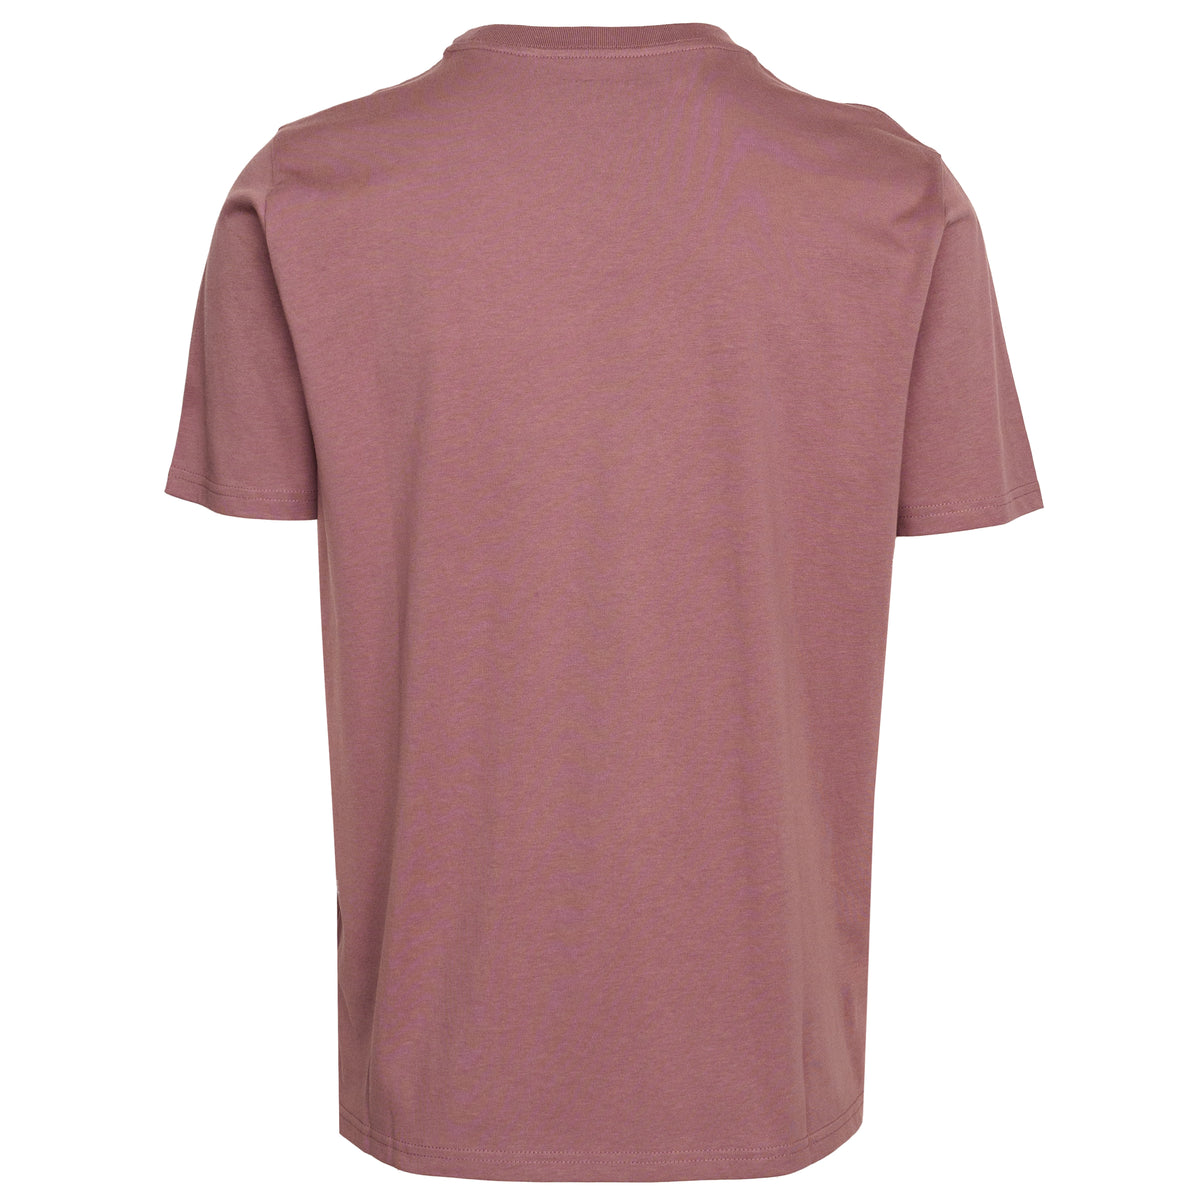 Load image into Gallery viewer, Carhartt WIP Daphne Pink Pocket Tee
